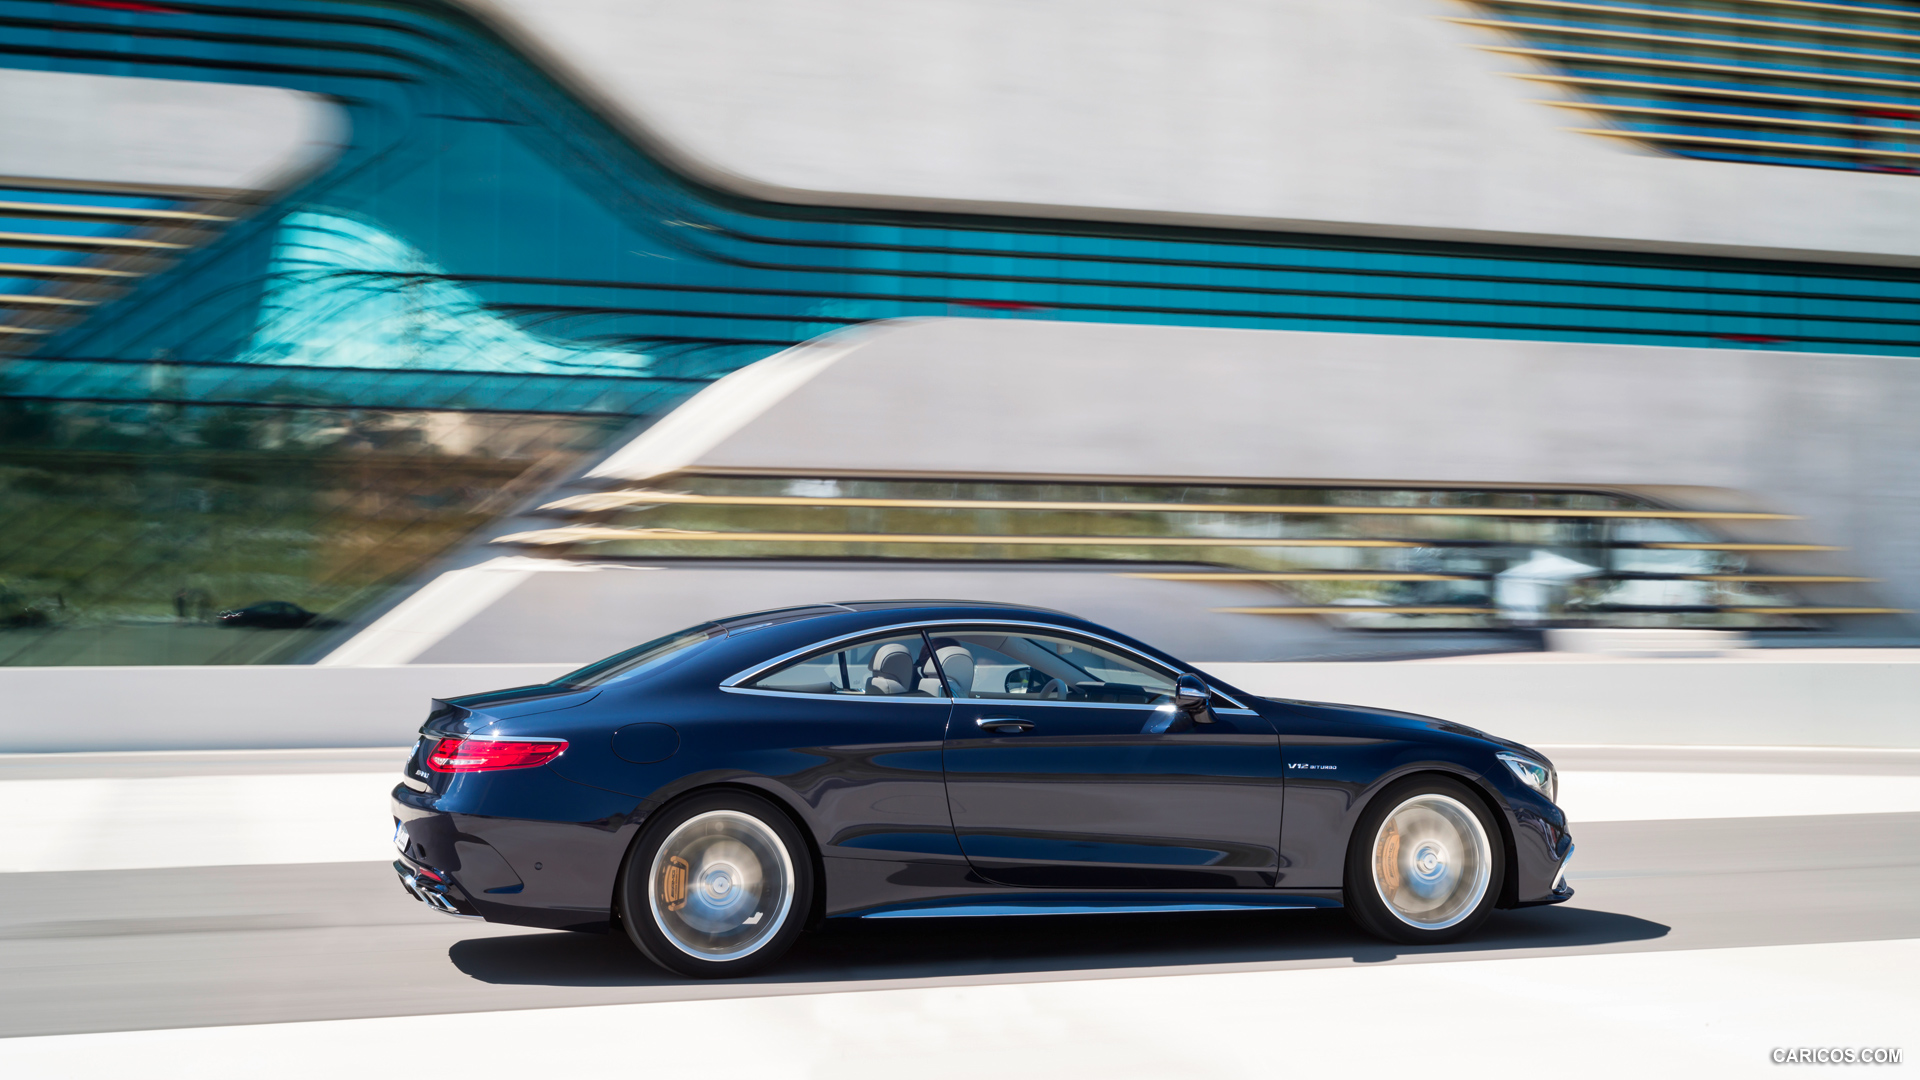 2015 Mercedes-Benz S65 AMG Coupe (Anthracite Blue) - Side, #4 of 101